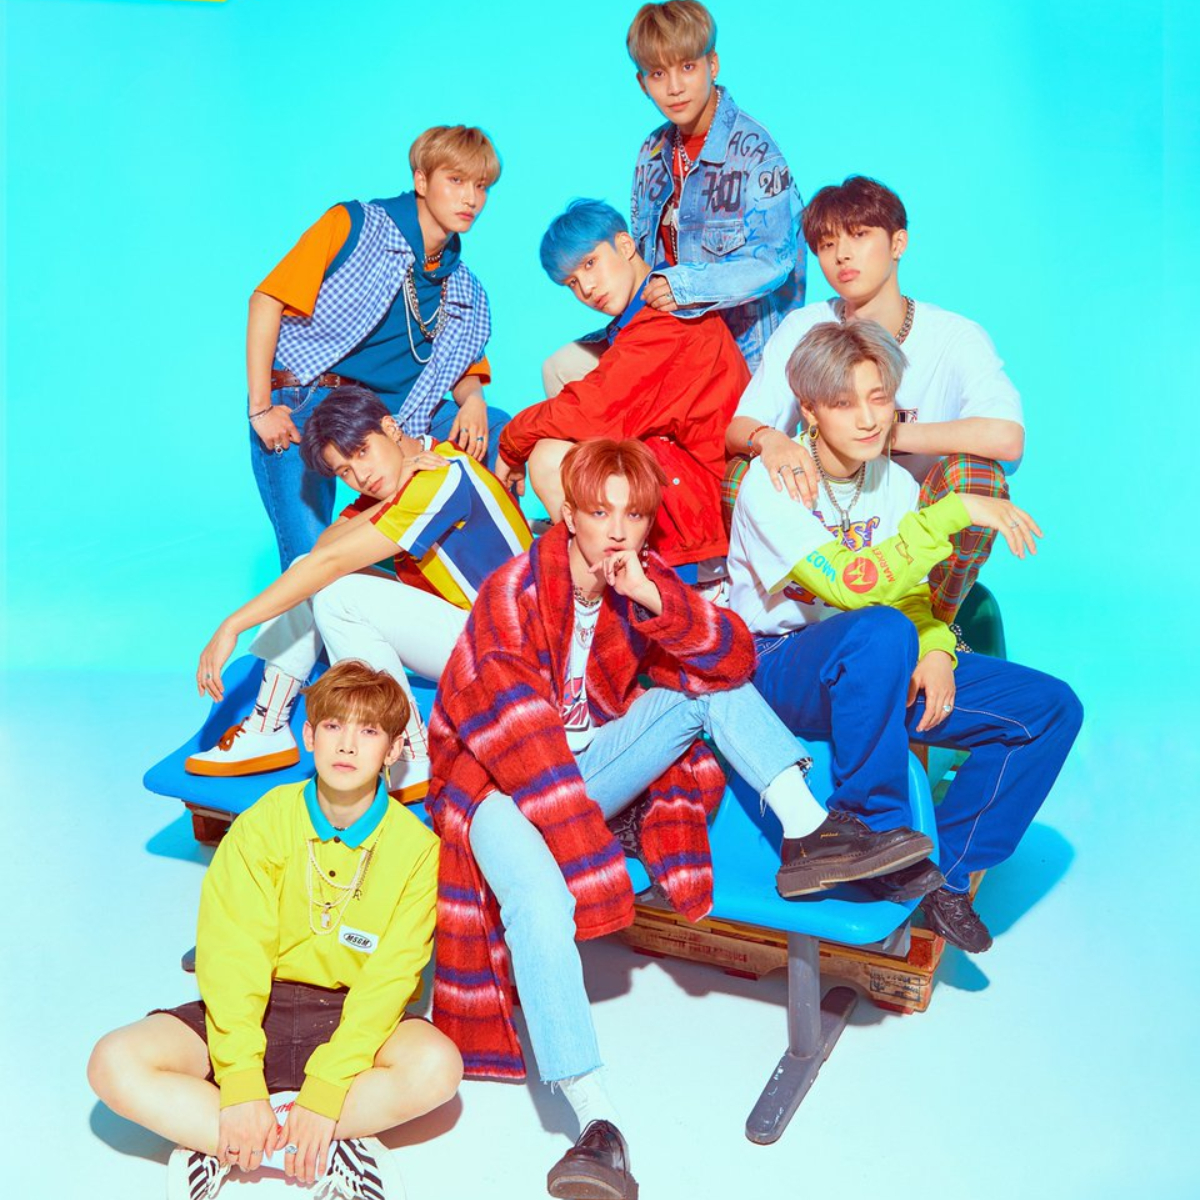 ATEEZ pose for group concept photo